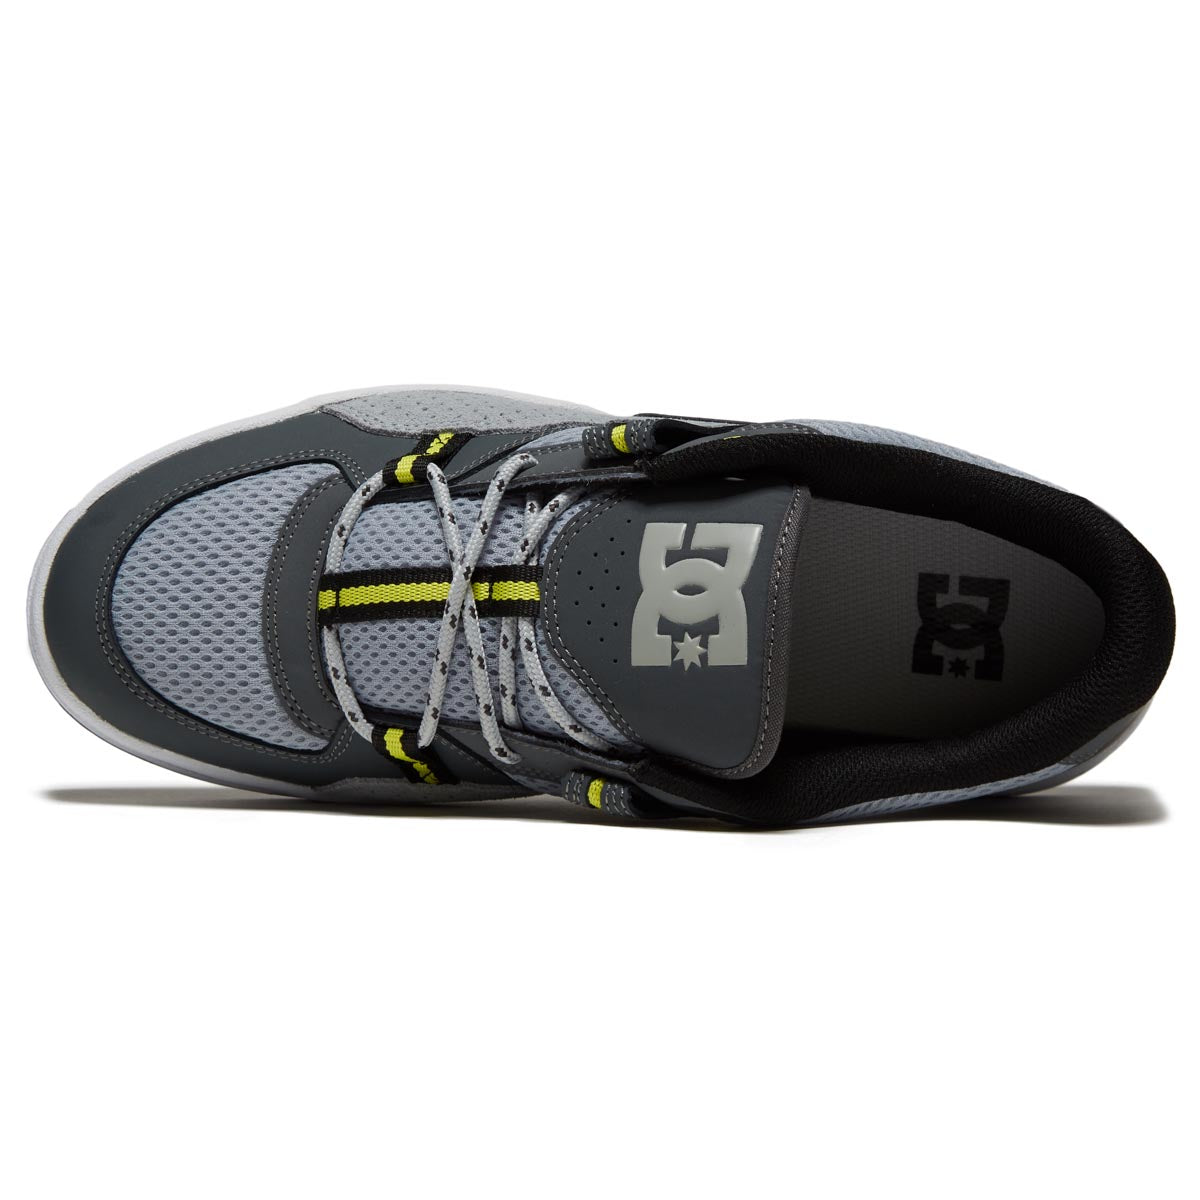 DC Construct Shoes - White/Grey/Yellow image 3